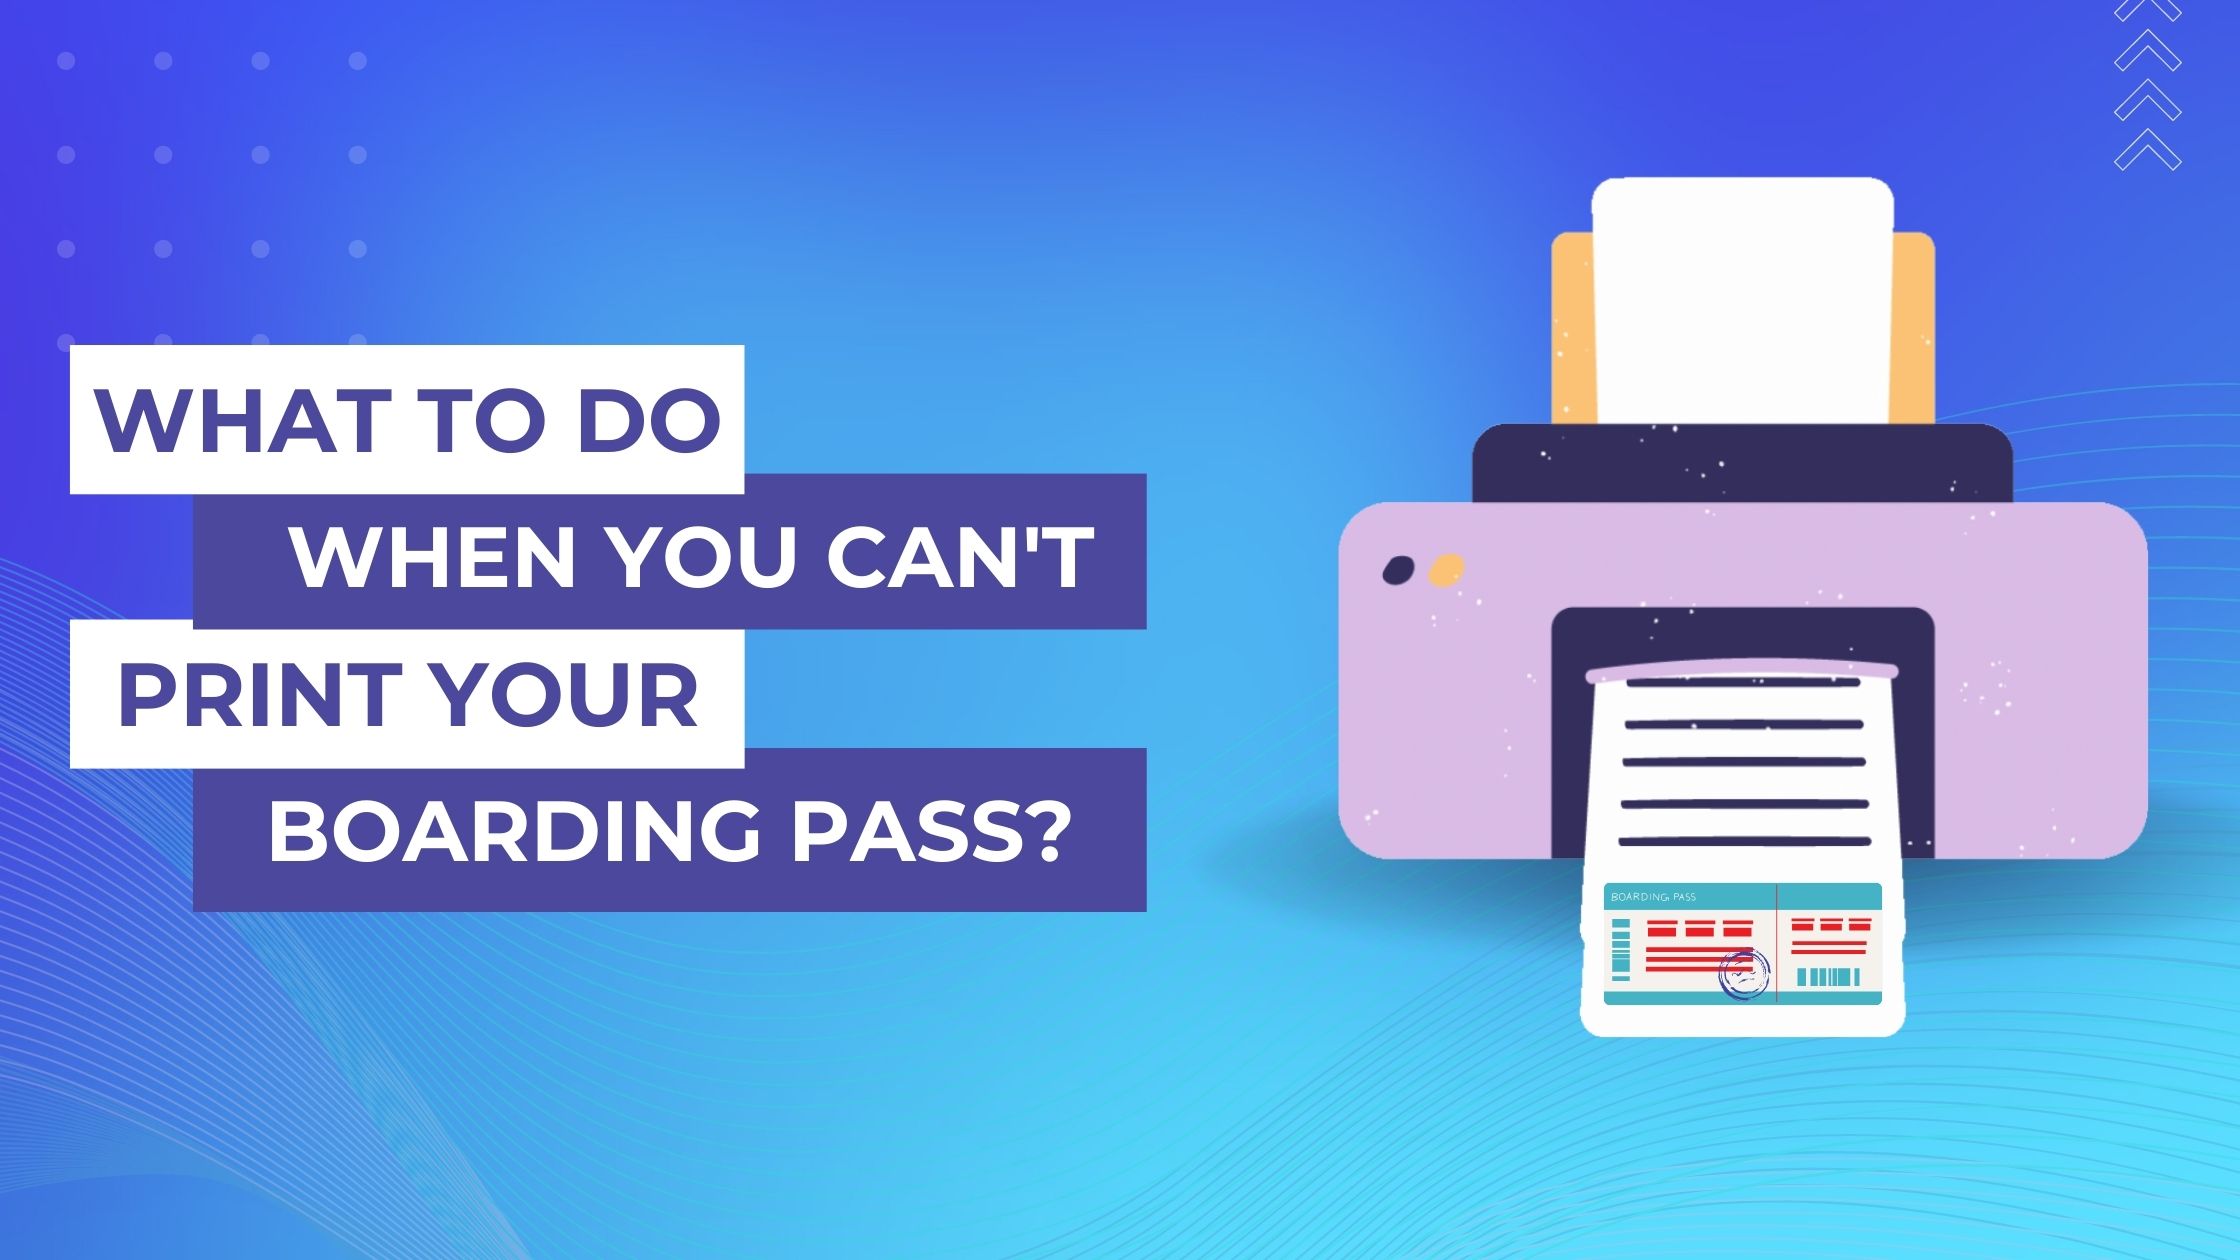 What To Do When You Can't Print Your Boarding Pass